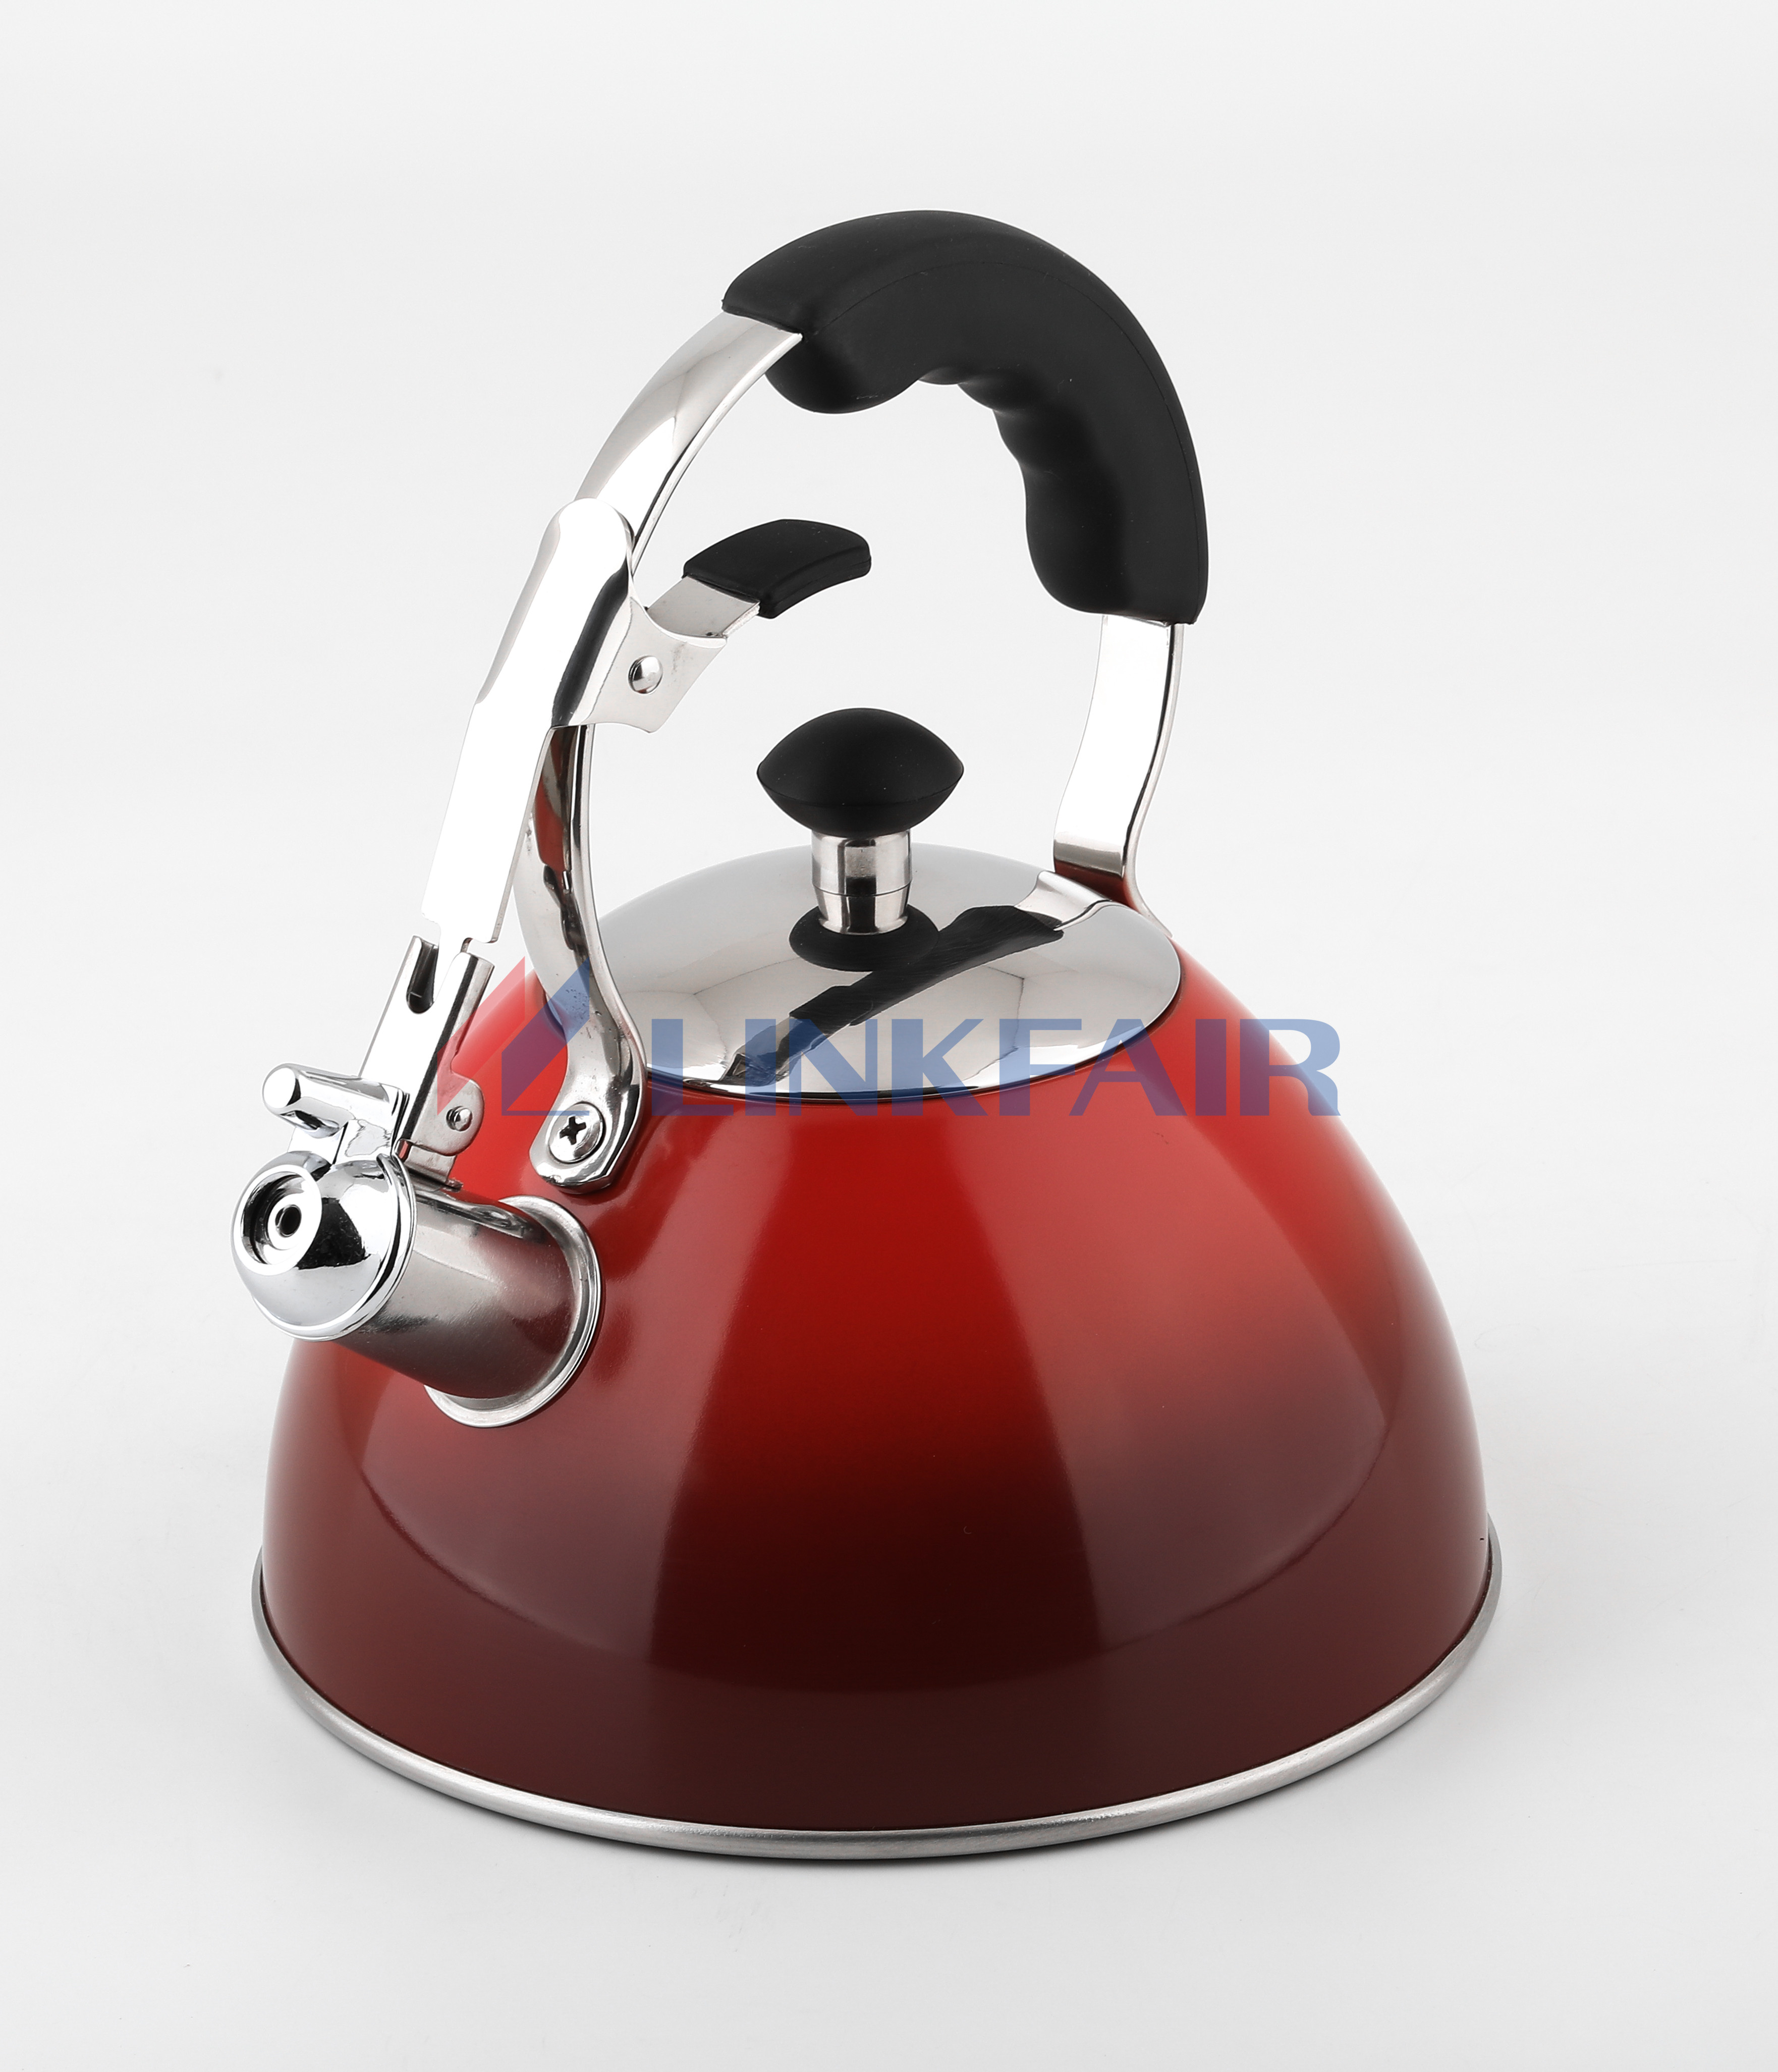 2.0L Gradient Red Stainless Steel Kettle